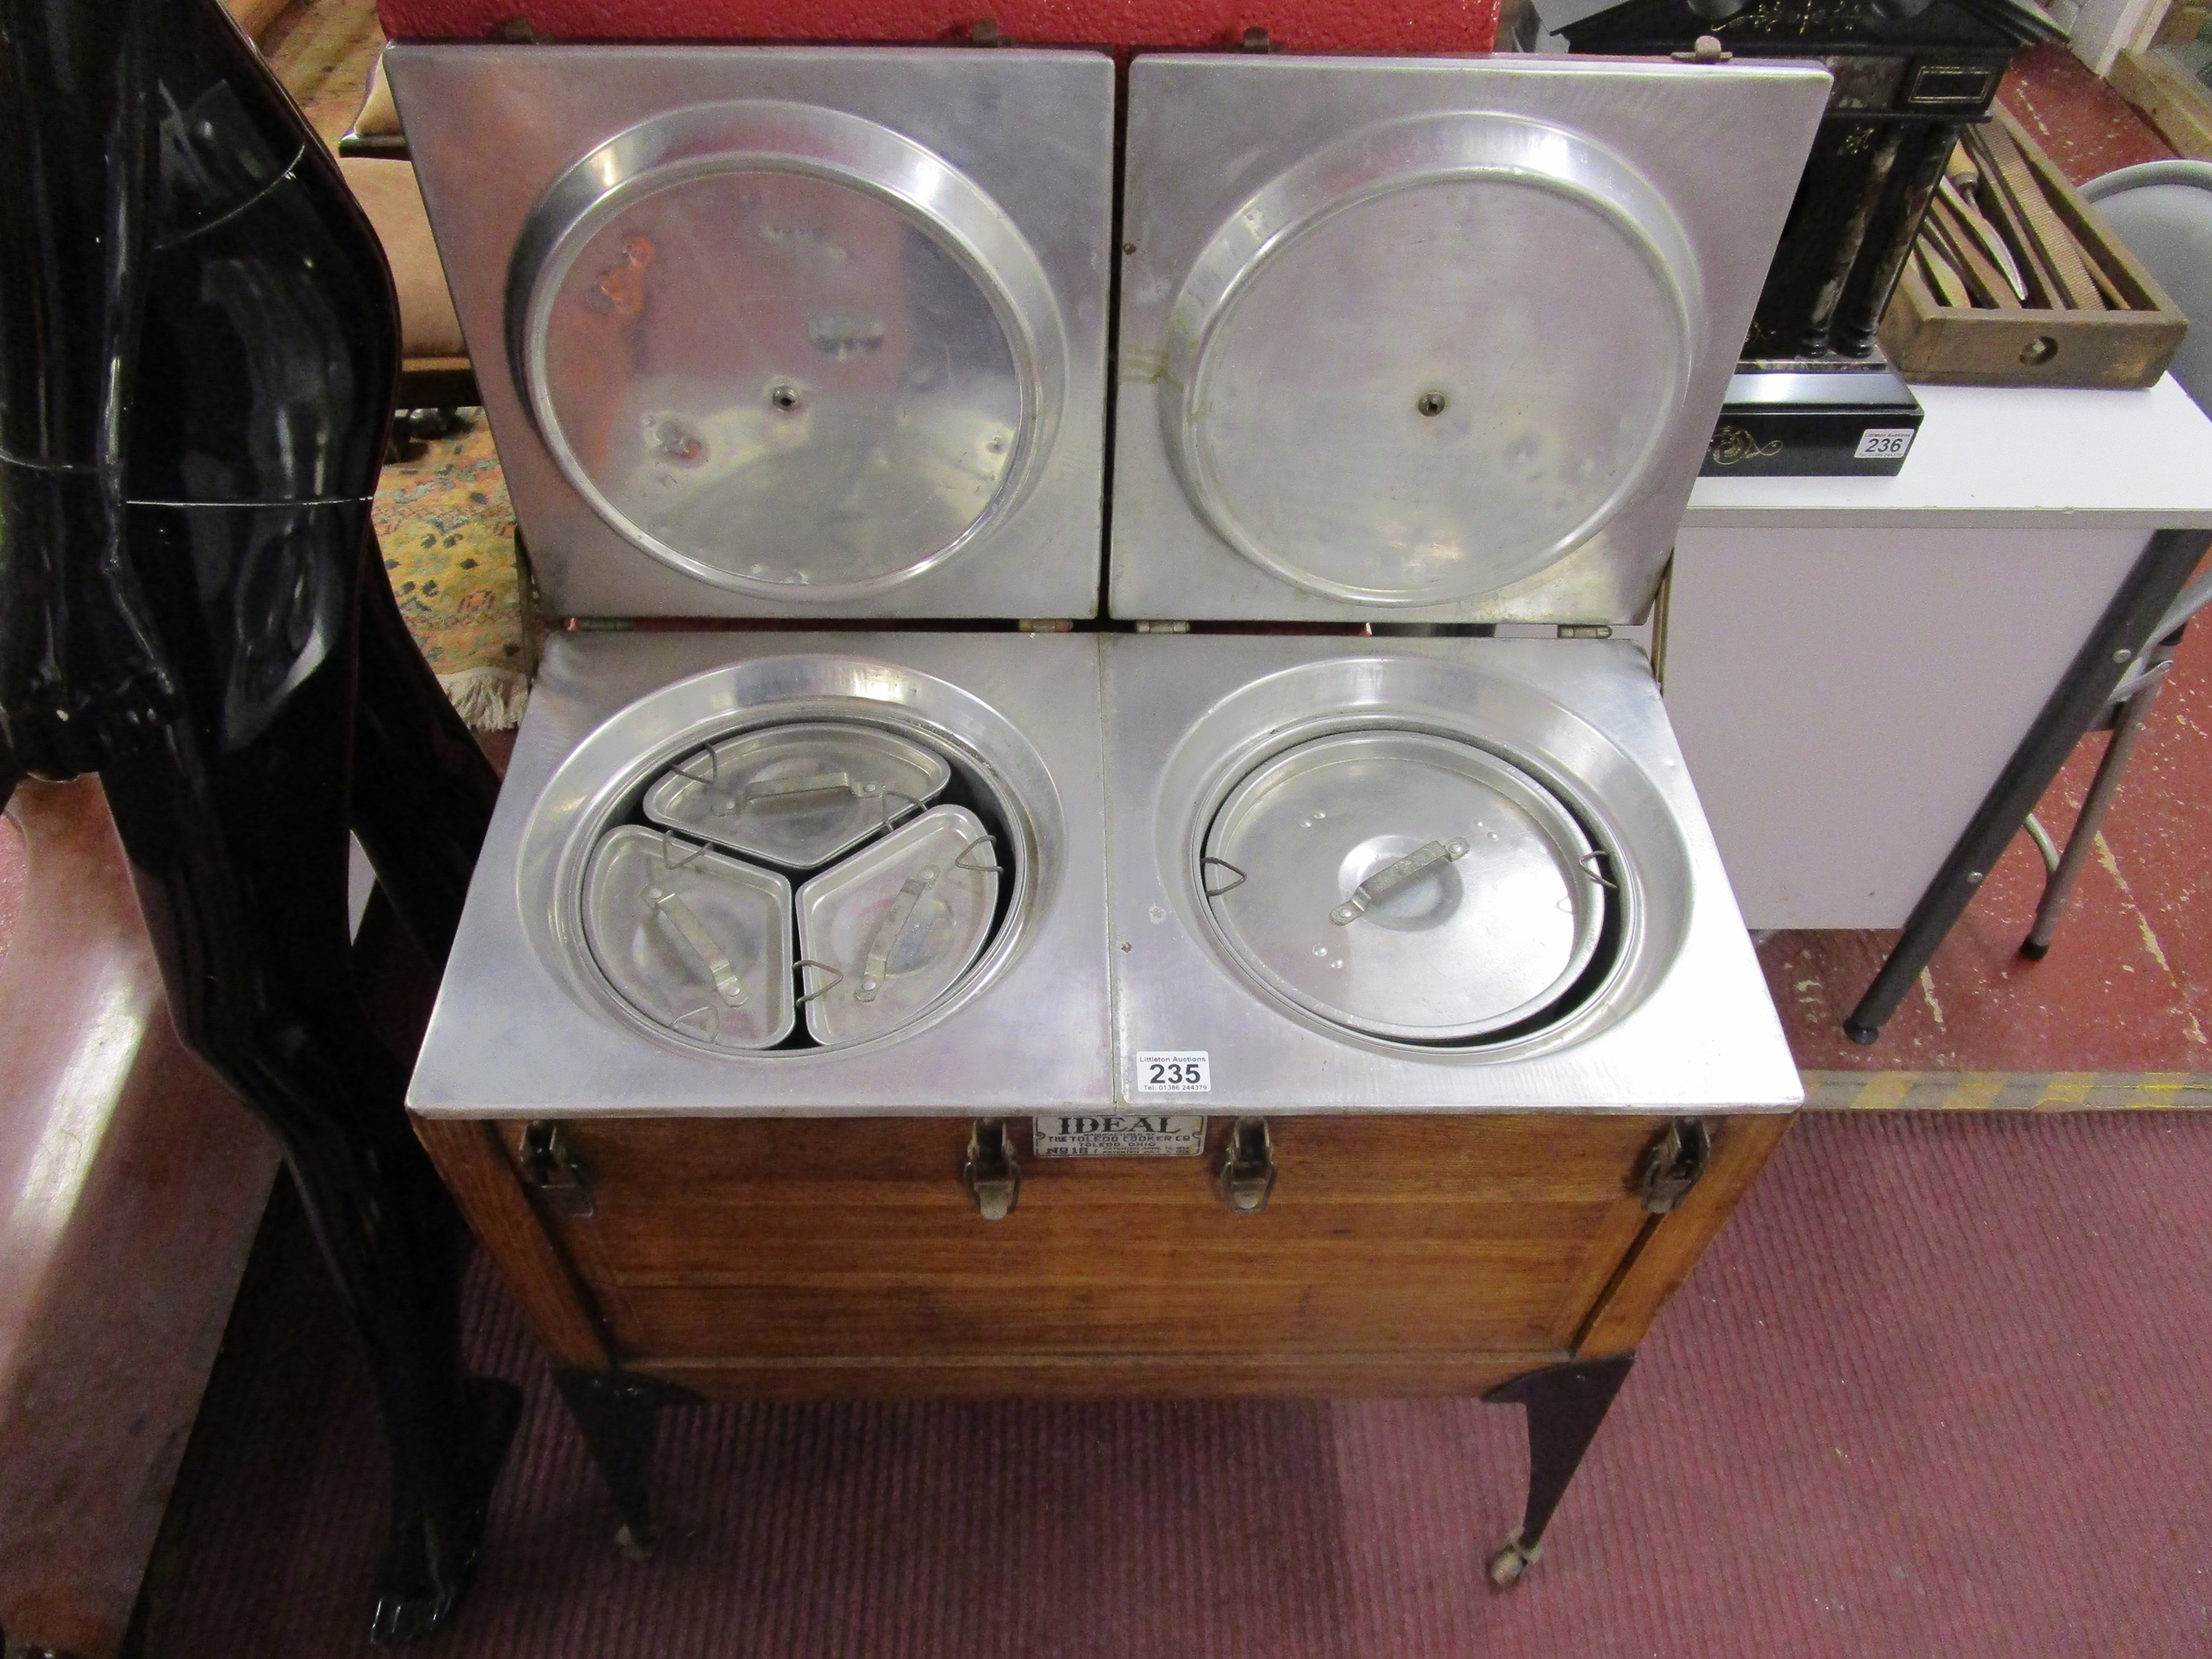 Rare and unusual early 20thC American slow cooker (complete) Model No 18 ‘Ideal’ manufactured by The - Image 15 of 20